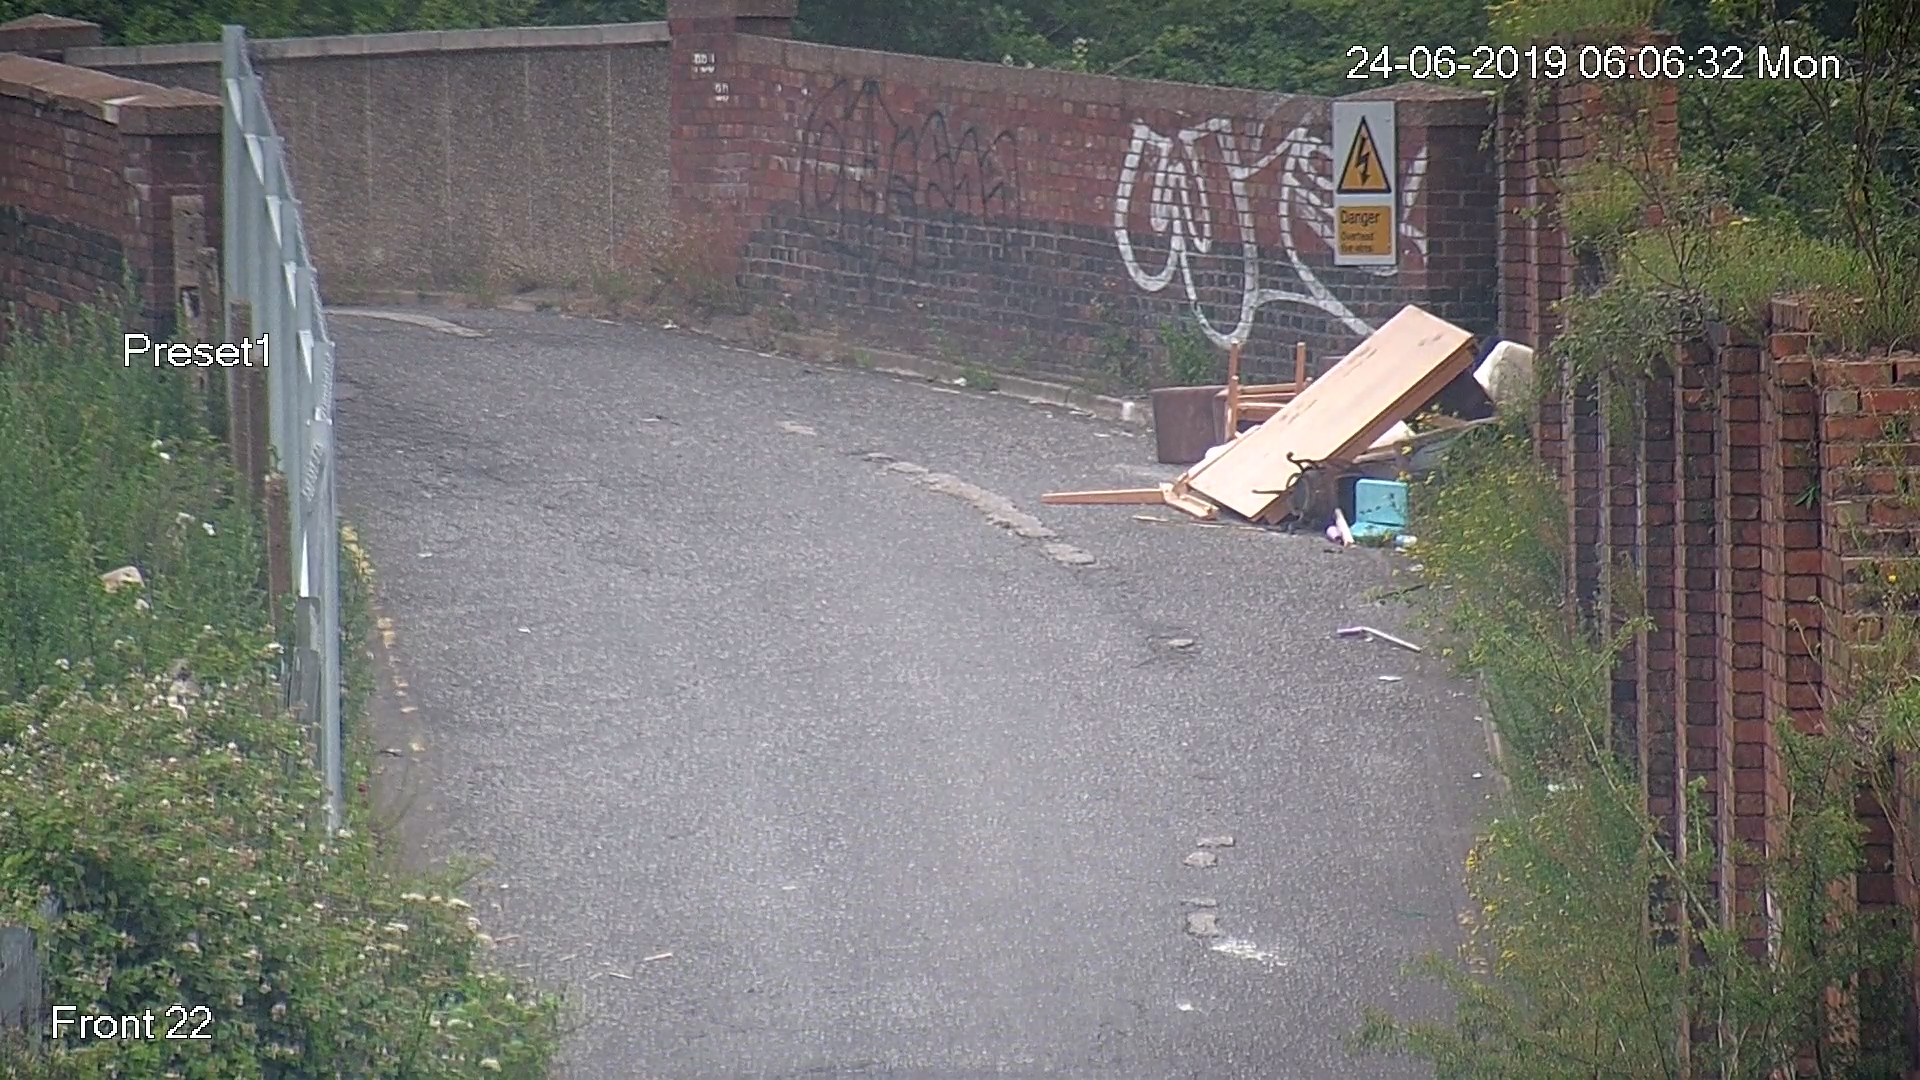 A screenshot of a CCTV image showing a road with fly tipped rubbish dumped to the side